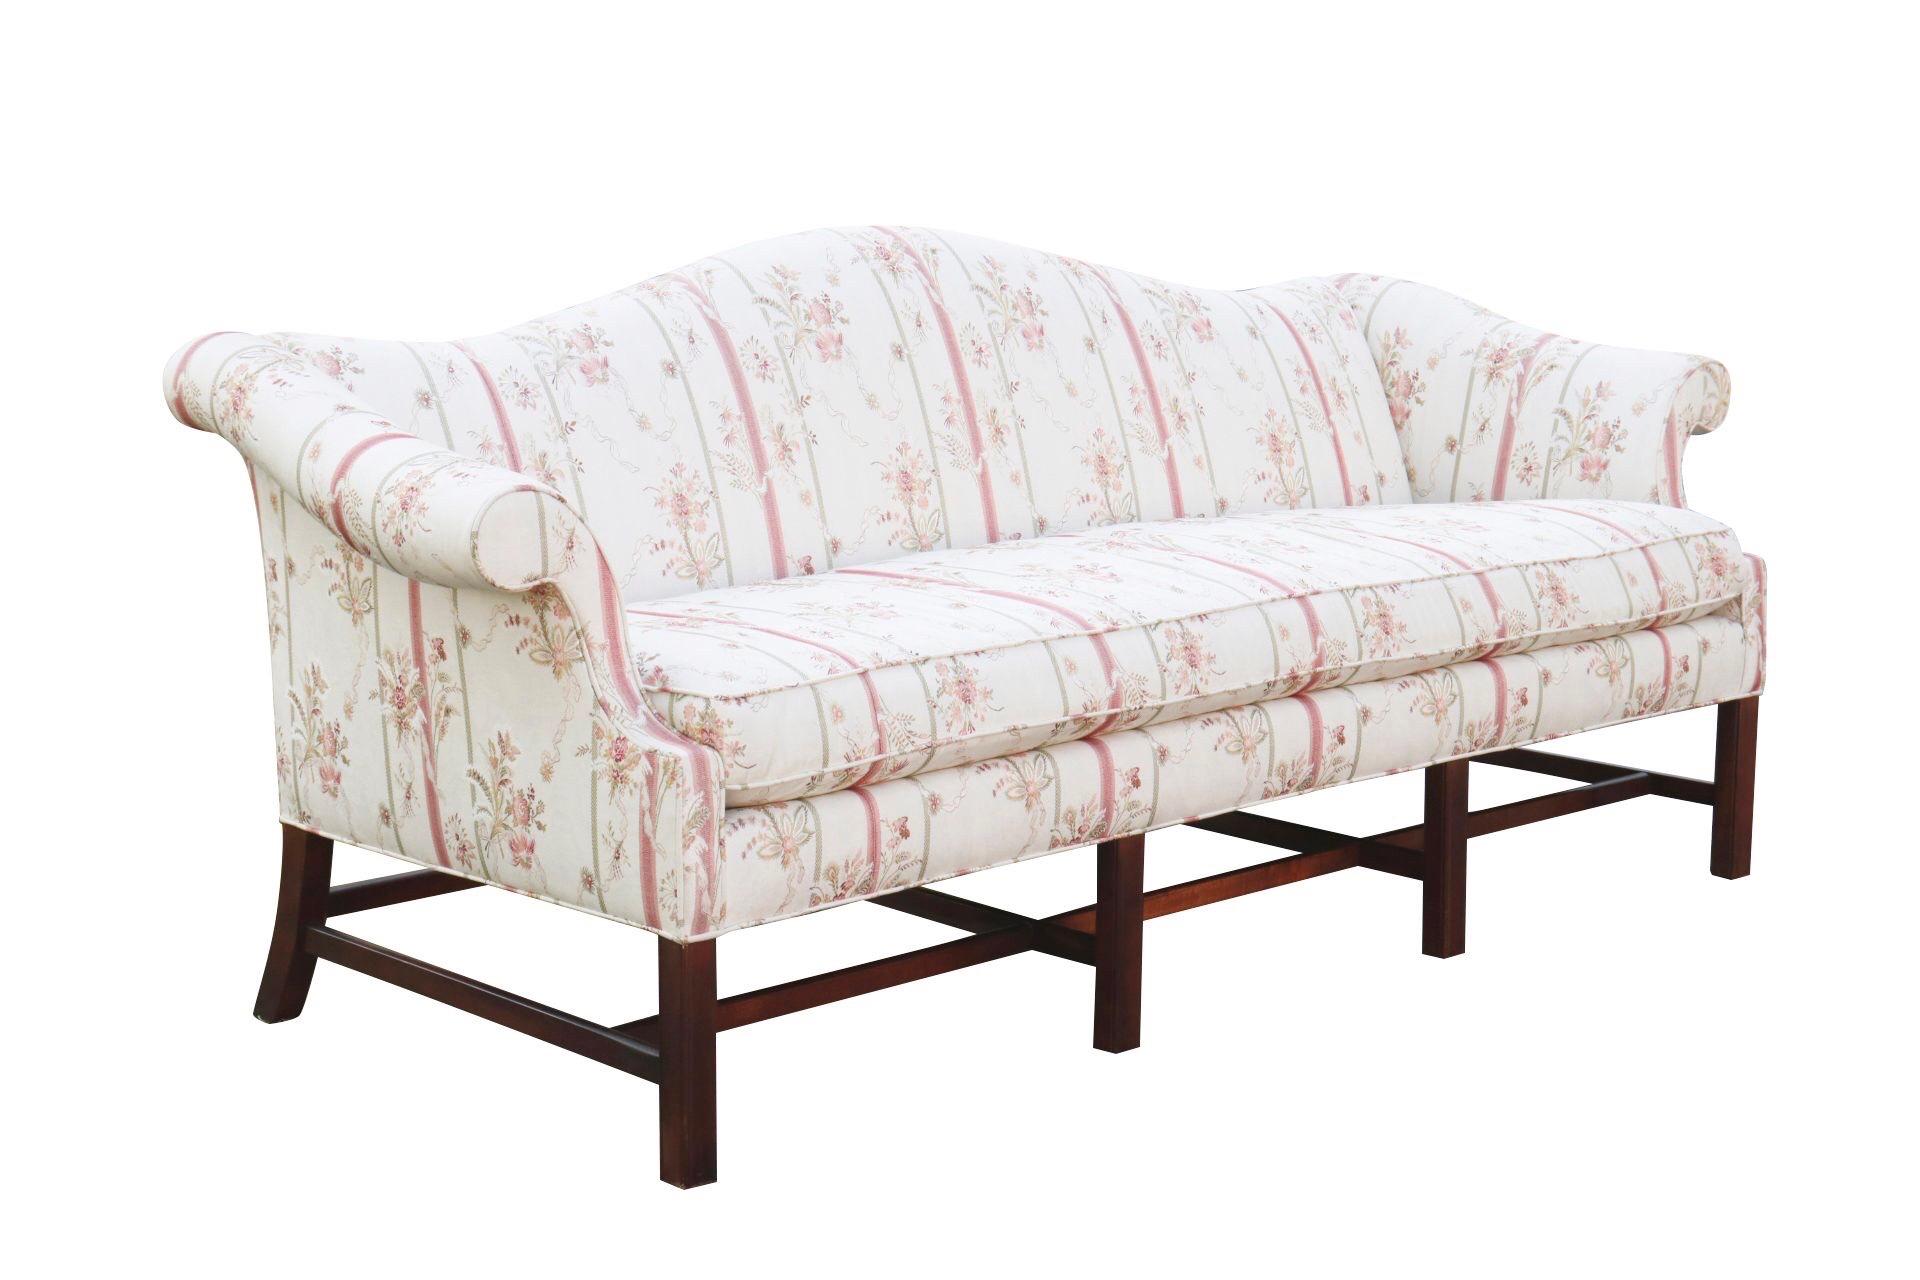 A Chippendale style camel back sofa made by Baker Furniture. The soft rolling camel back meets shapely outward rolled arms, upholstered in a floral ribbon striped fabric. A single bench cushion is down filled. Maker's label under the cushion reads